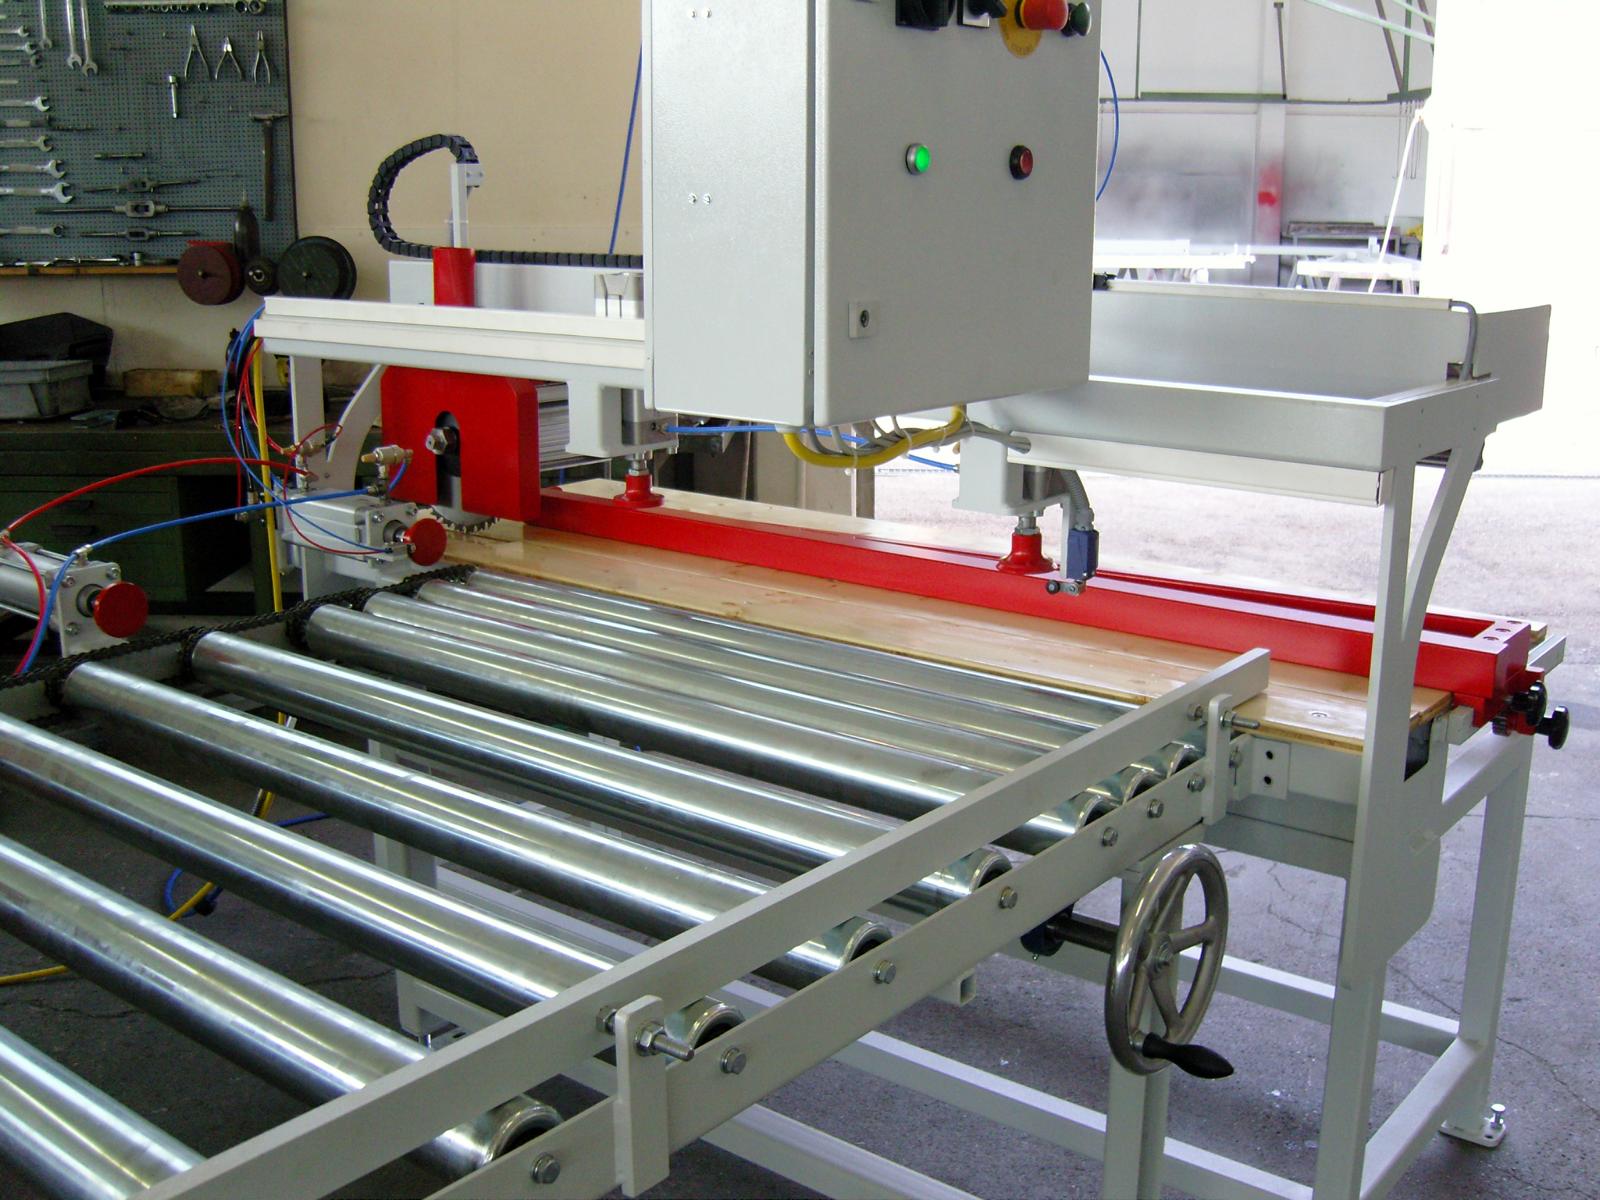 Hot Plate press with roller conveyor and mitre saw